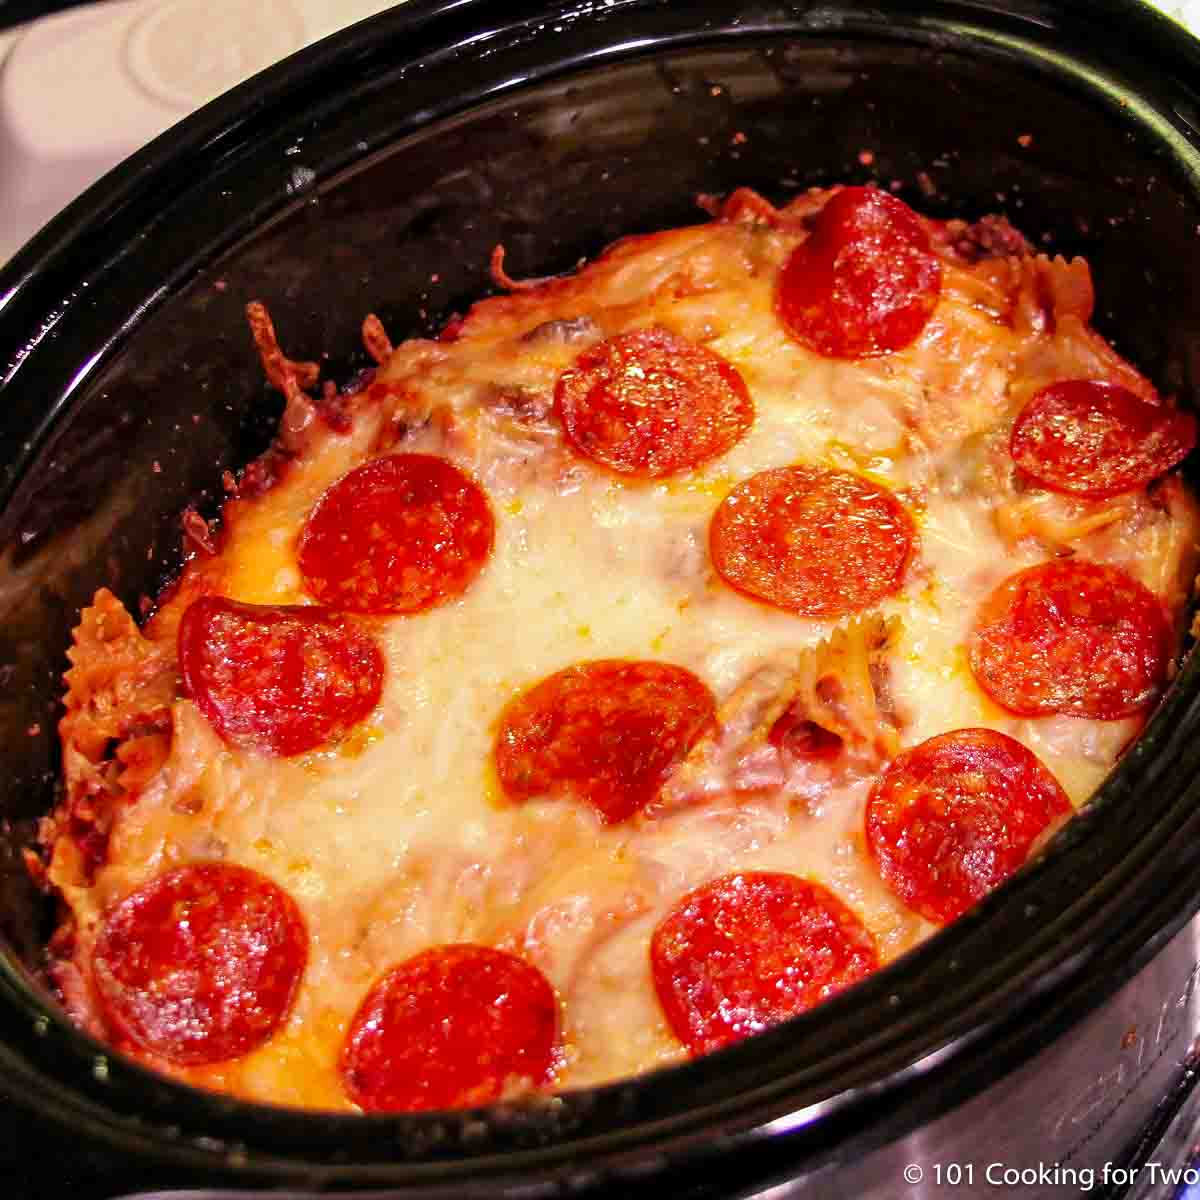 https://www.101cookingfortwo.com/wp-content/uploads/2023/09/Cooked-pizza-casserole-in-a-crock-pot.jpg